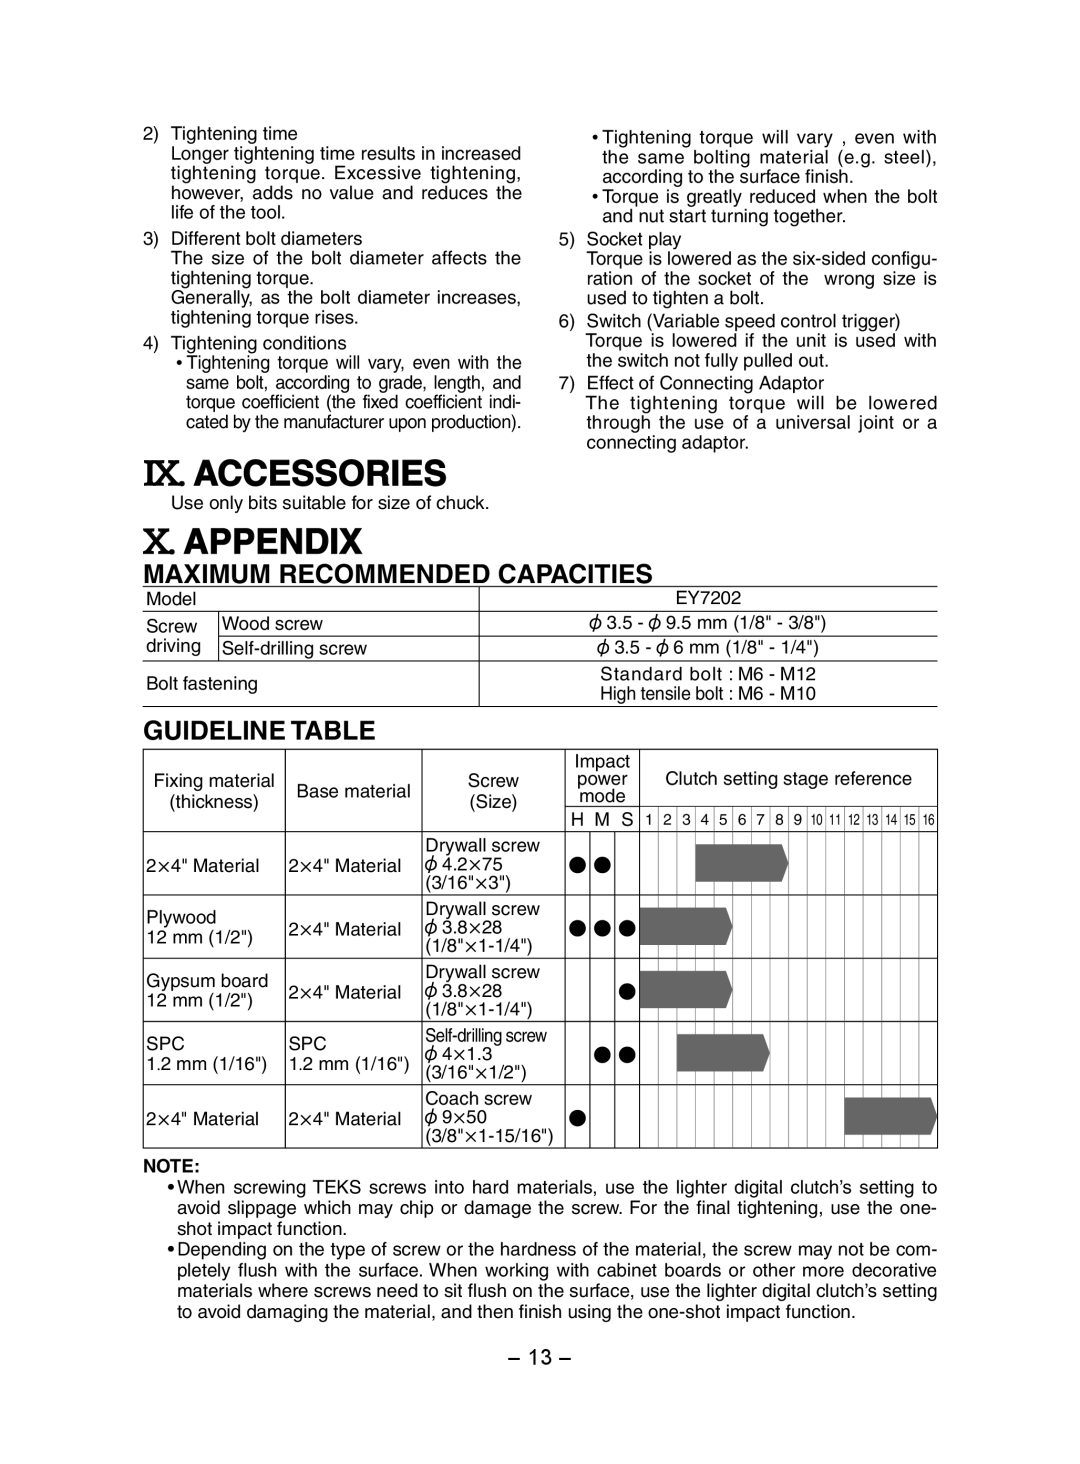 Panasonic EY7202 operating instructions Ix. Accessories, X. Appendix, Maximum Recommended Capacities, Guideline Table 